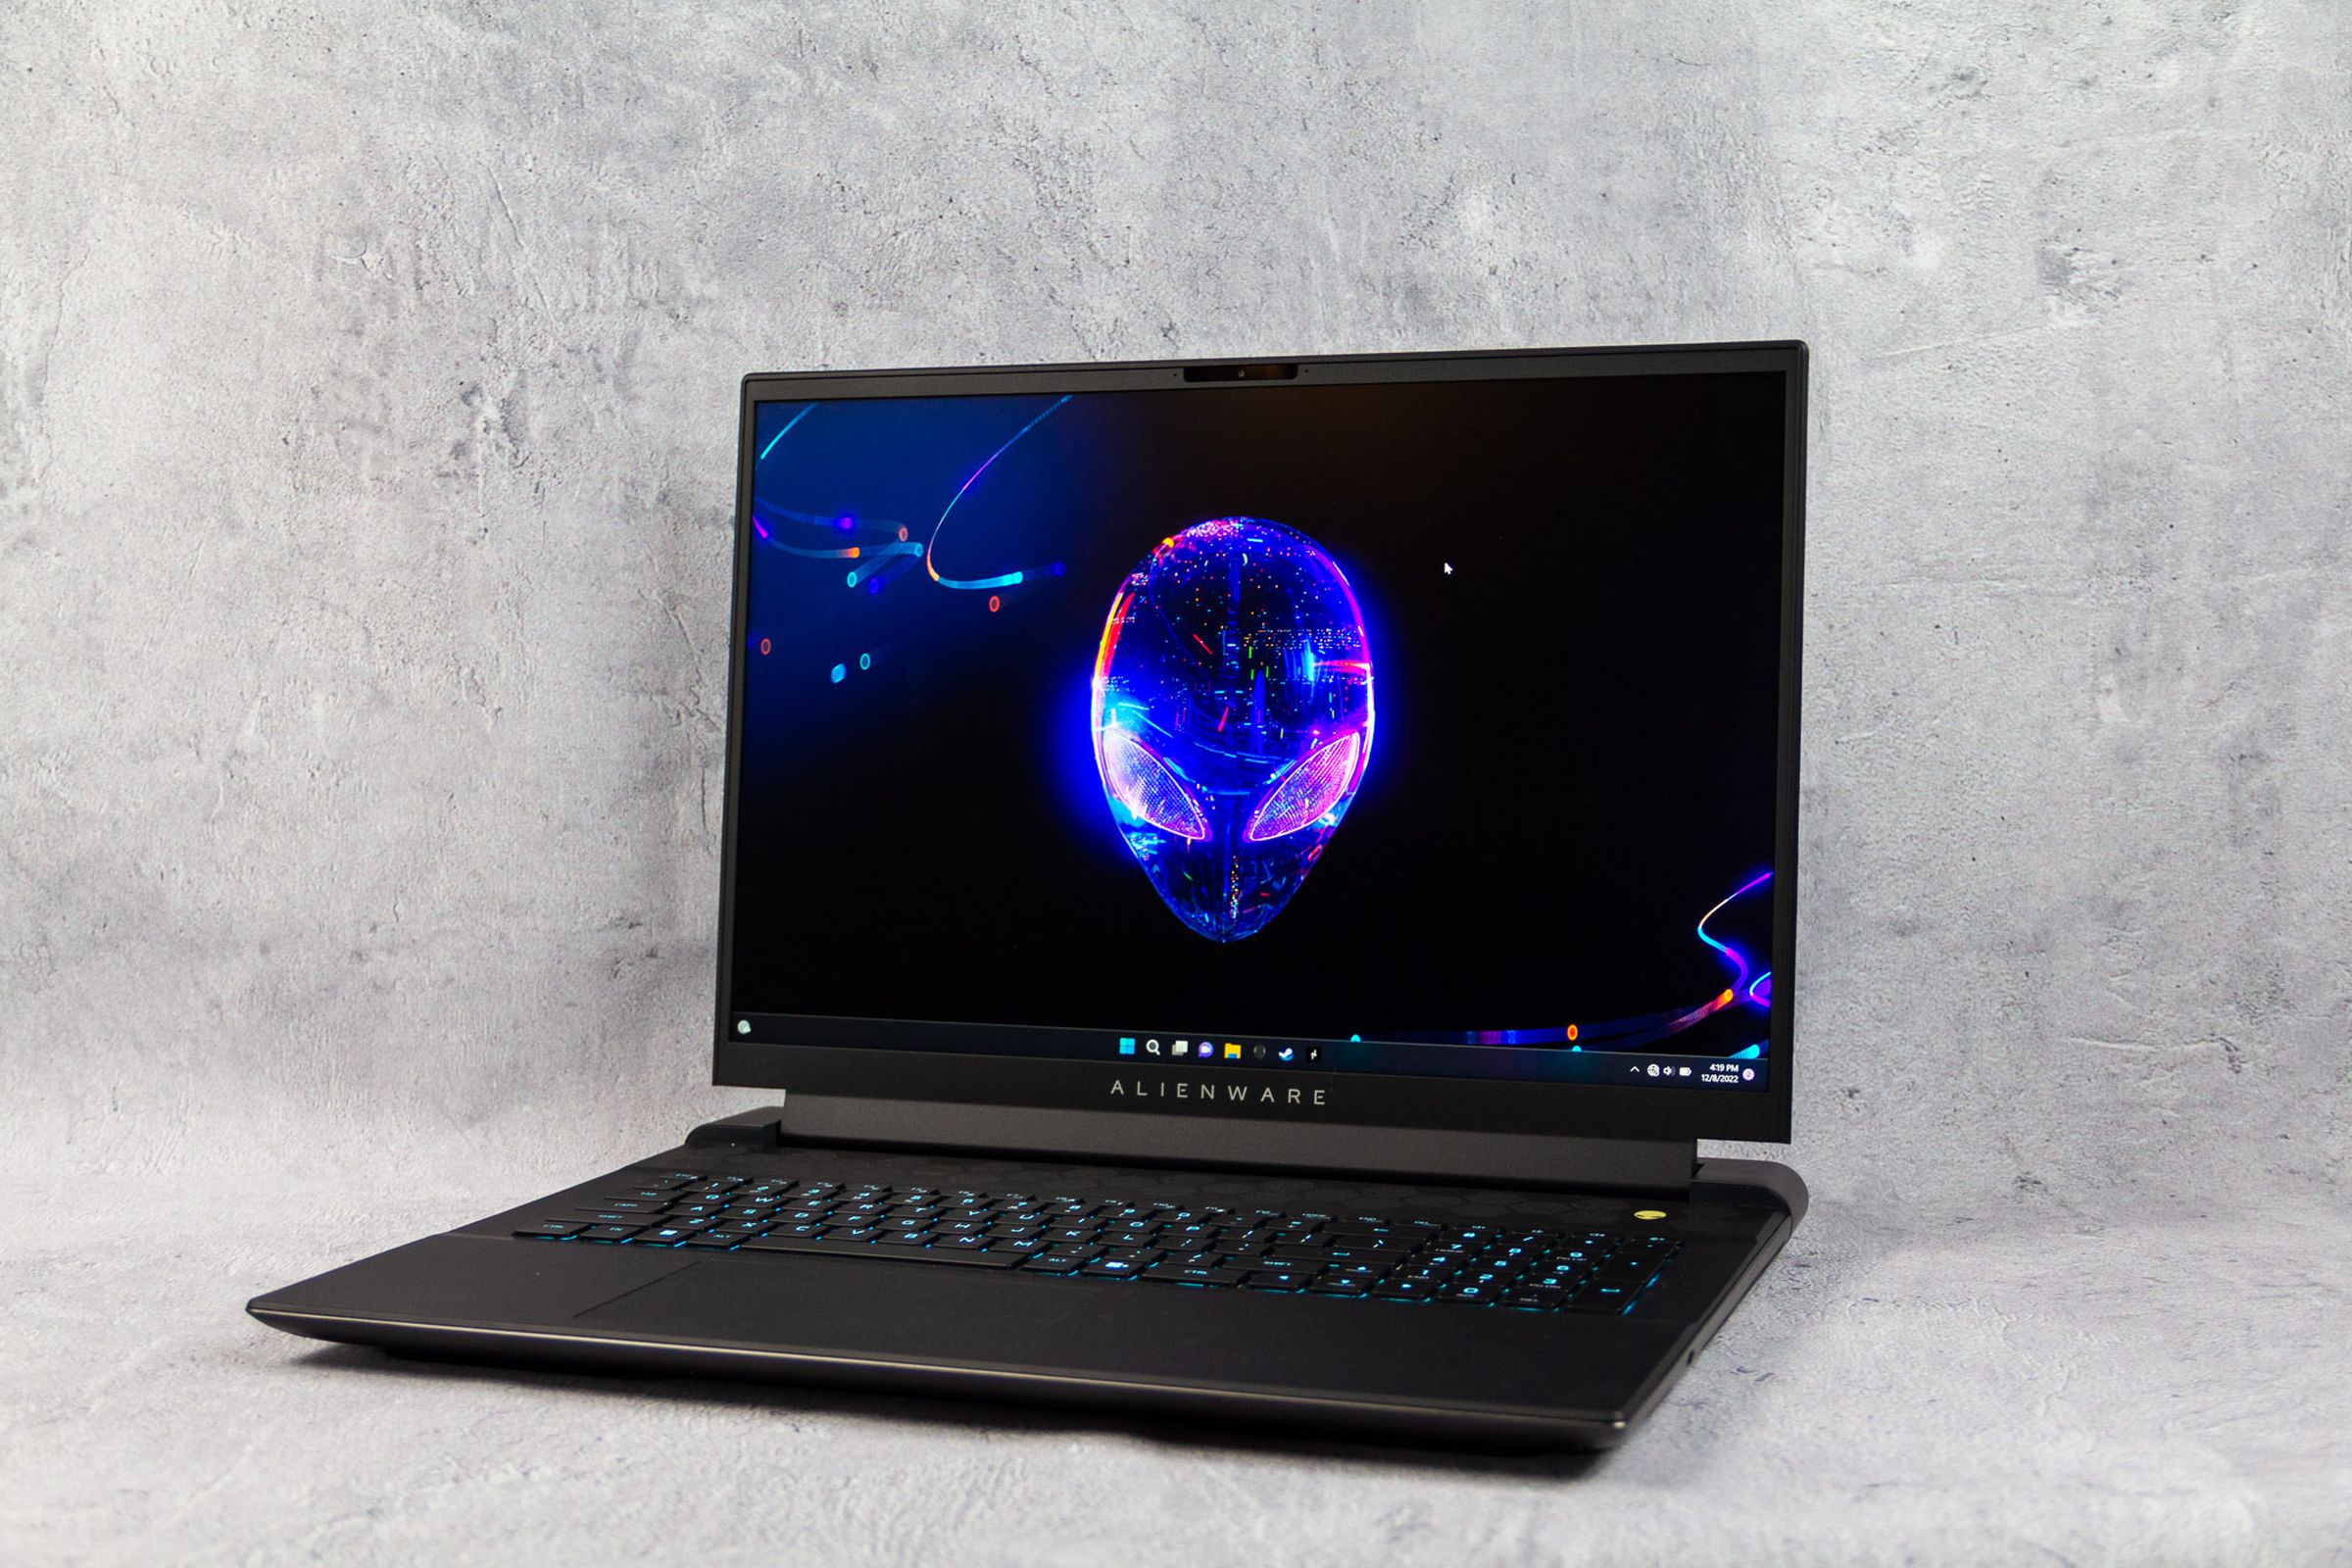 The Alienware M18 gaming laptop with its display showing the Alienware logo.